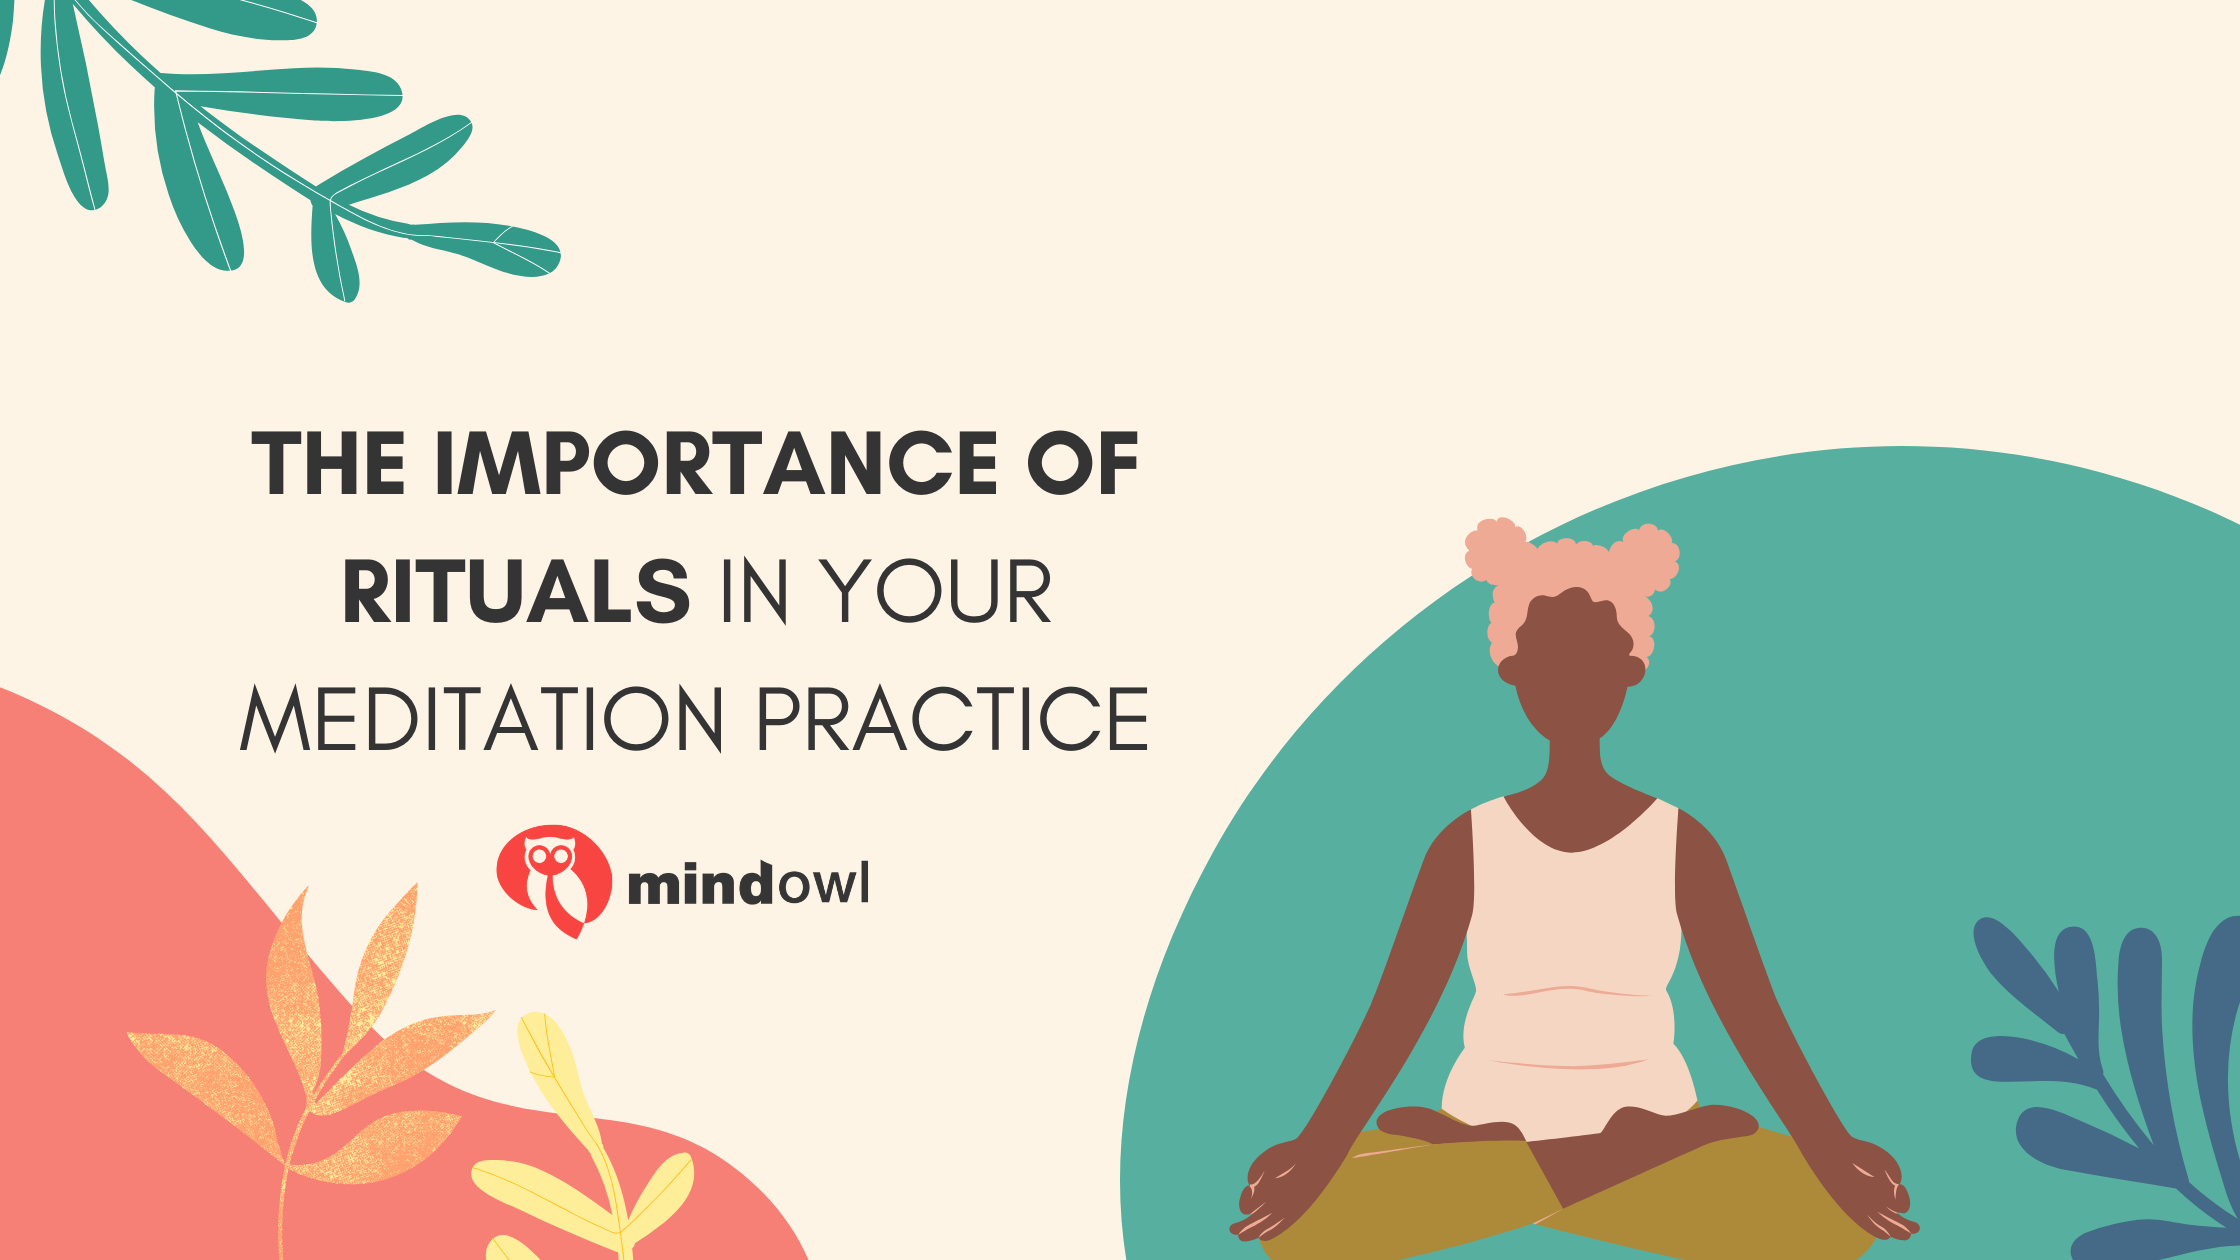 The importance of Rituals in meditation practice